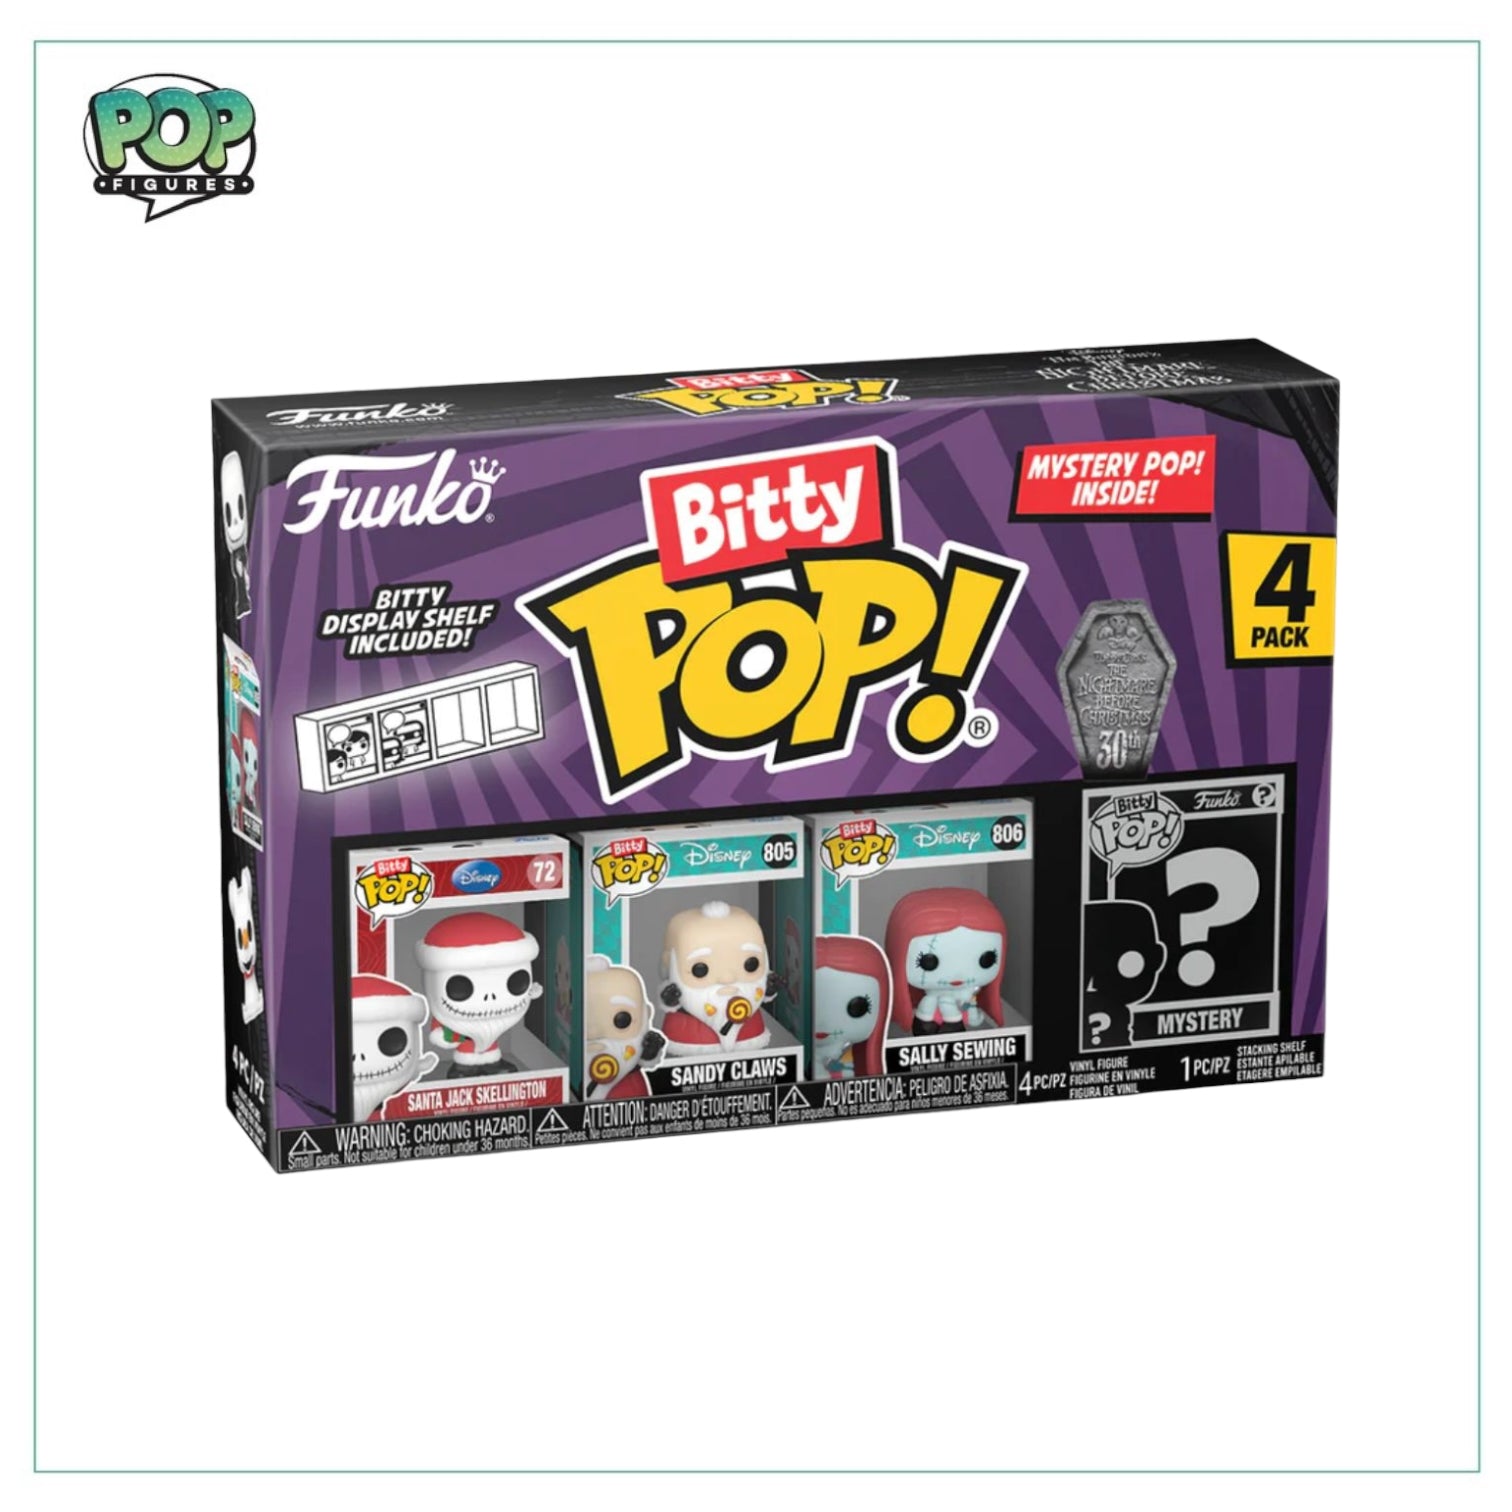 Santa Jack Skellington 4 pack Bitty POP! - The Nightmare before Christmas - Chance of Chase